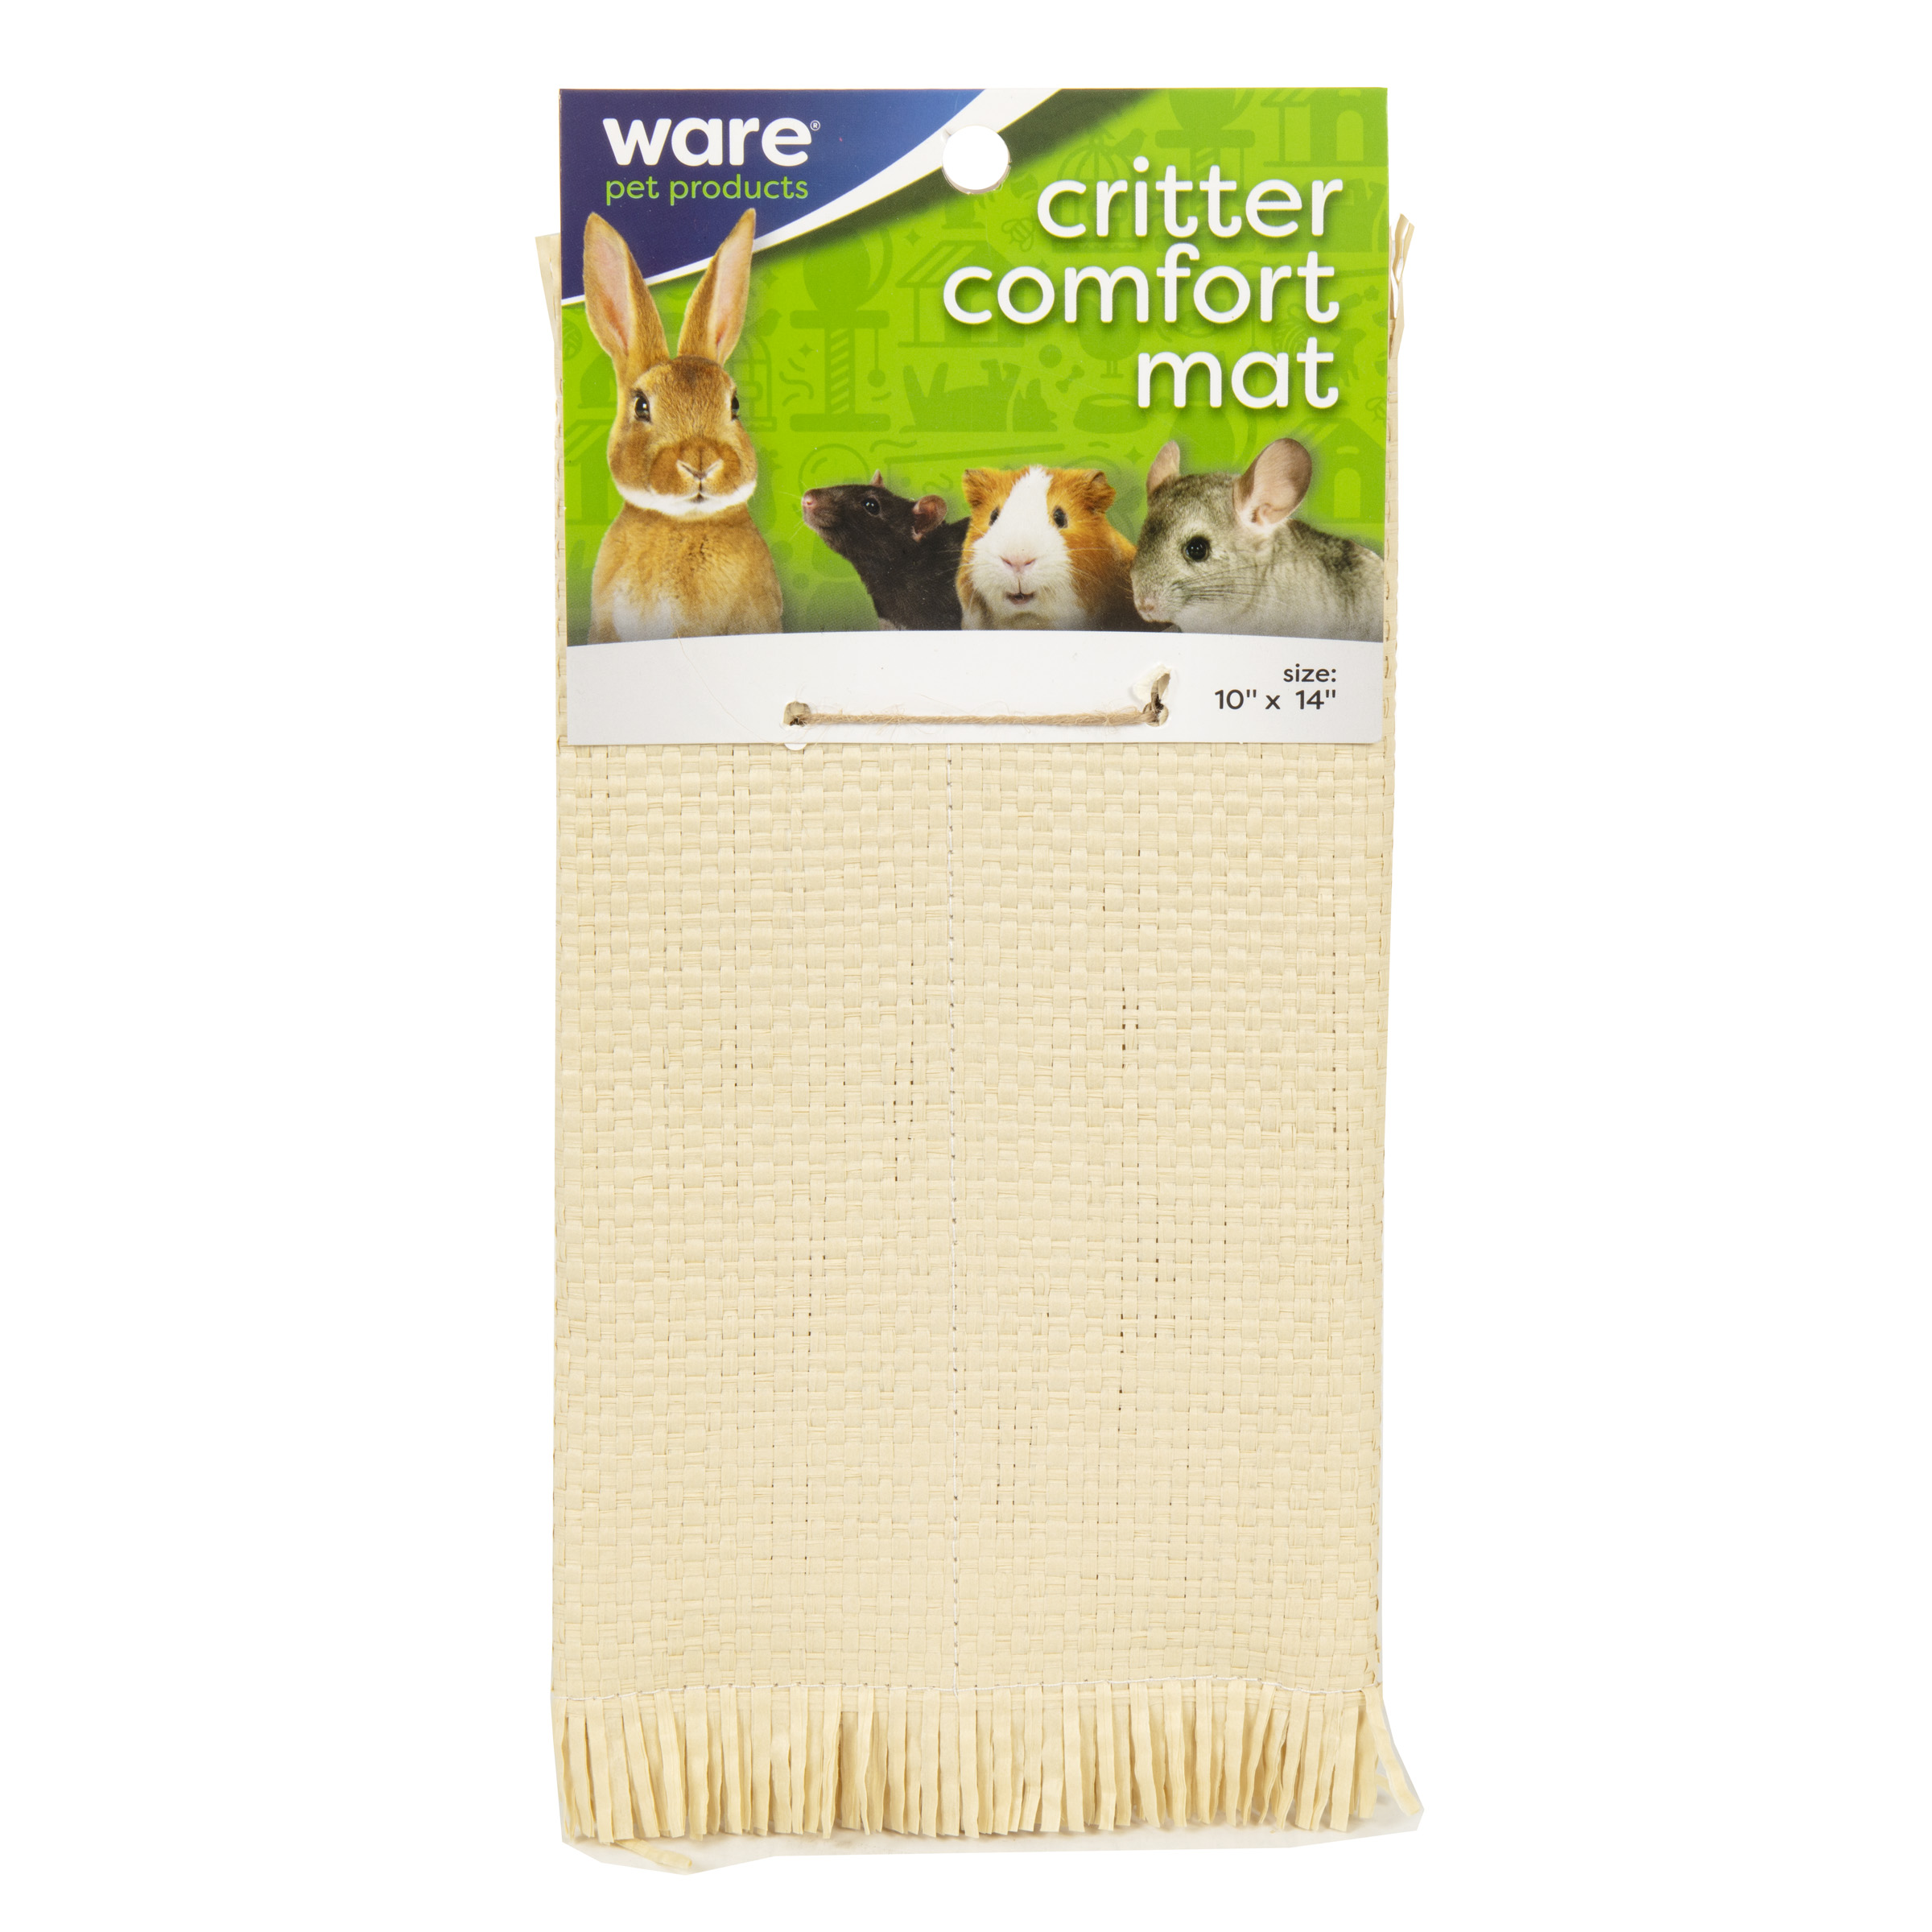 Critter Comfort Mat - 03165 - Ware Pet Products